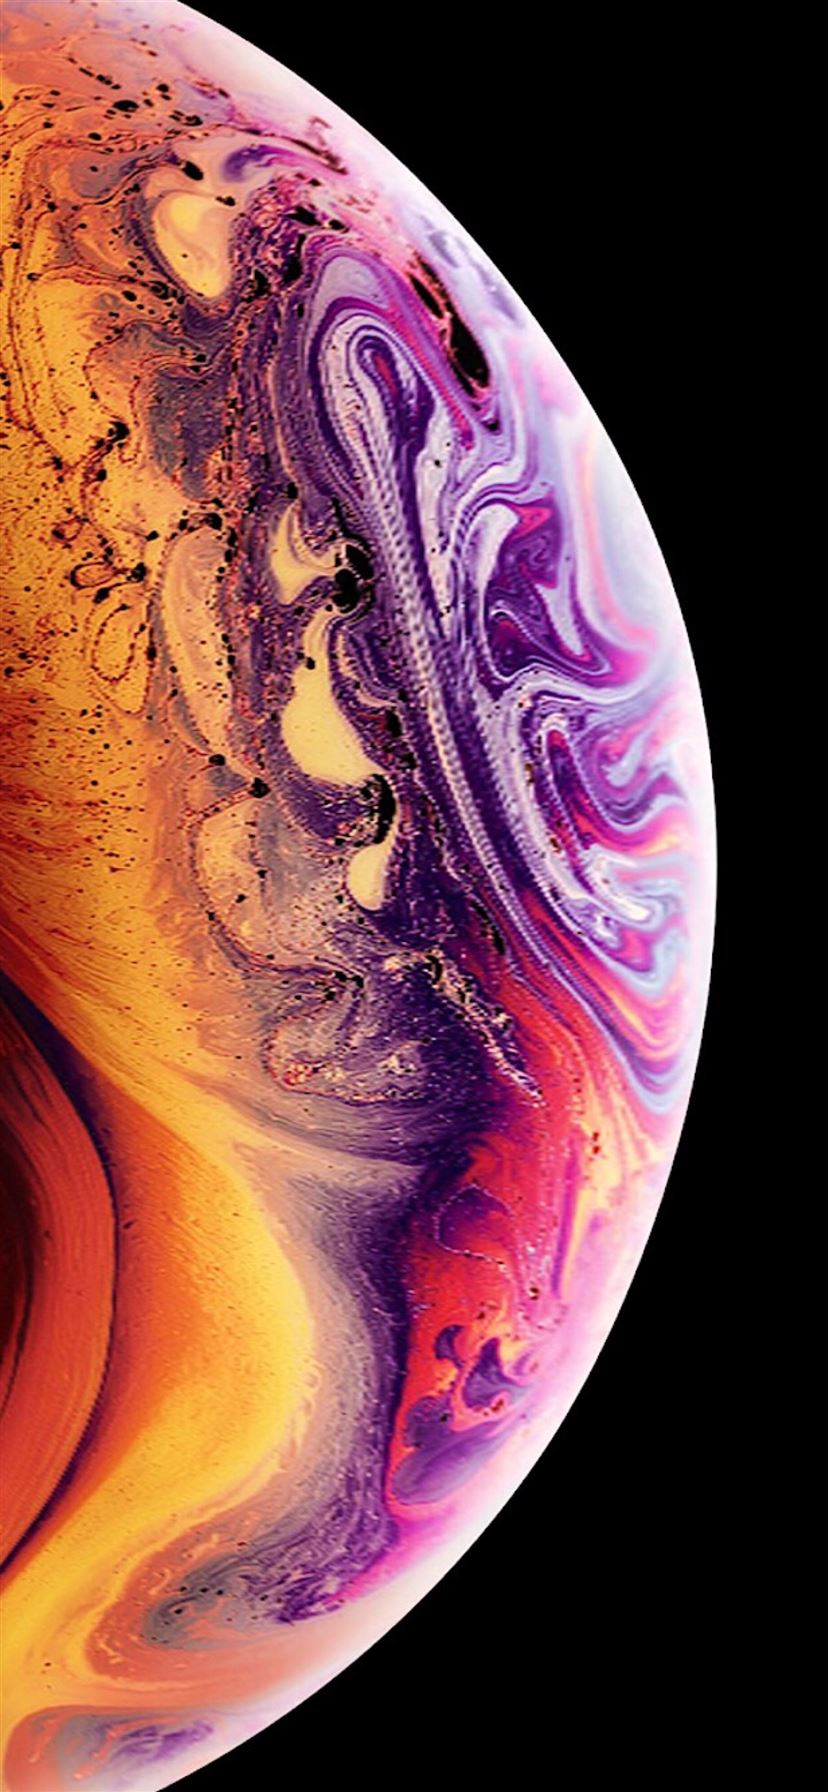 iPhone 11 Pro Max Wallpapers on WallpaperDog